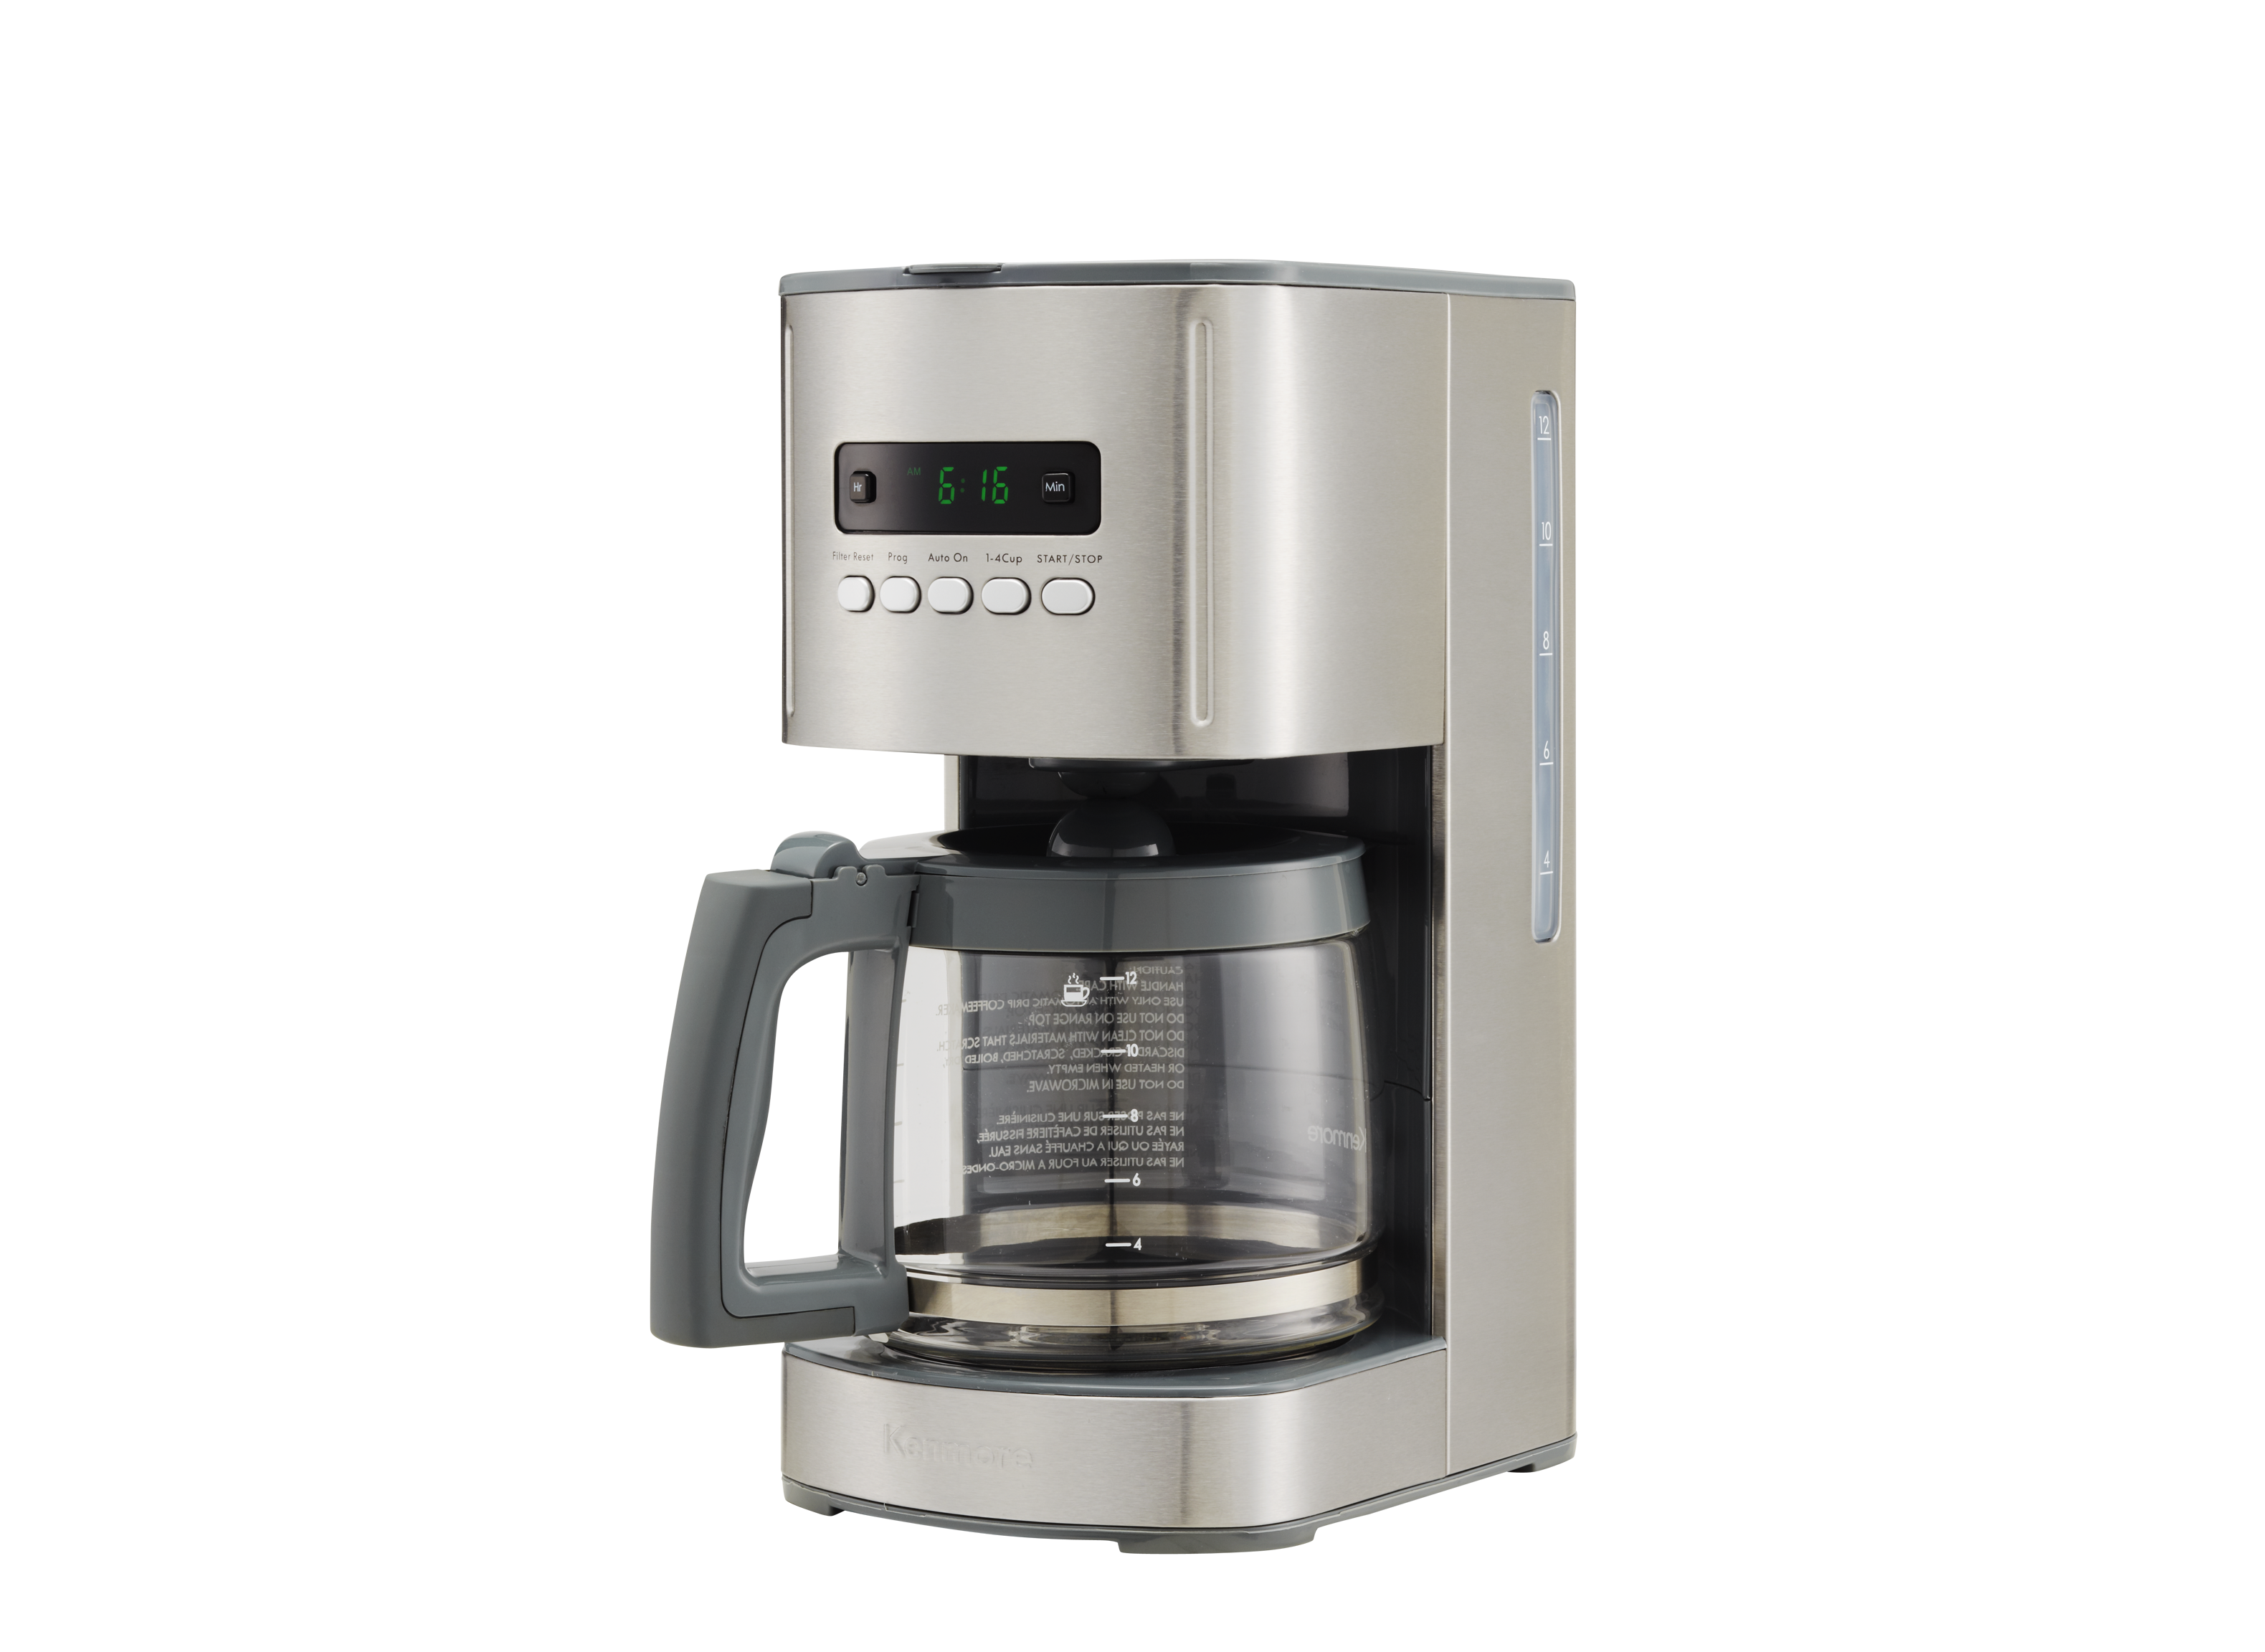 https://crdms.images.consumerreports.org/prod/products/cr/models/256867-coffeemakers-kenmore-programmable367101.png